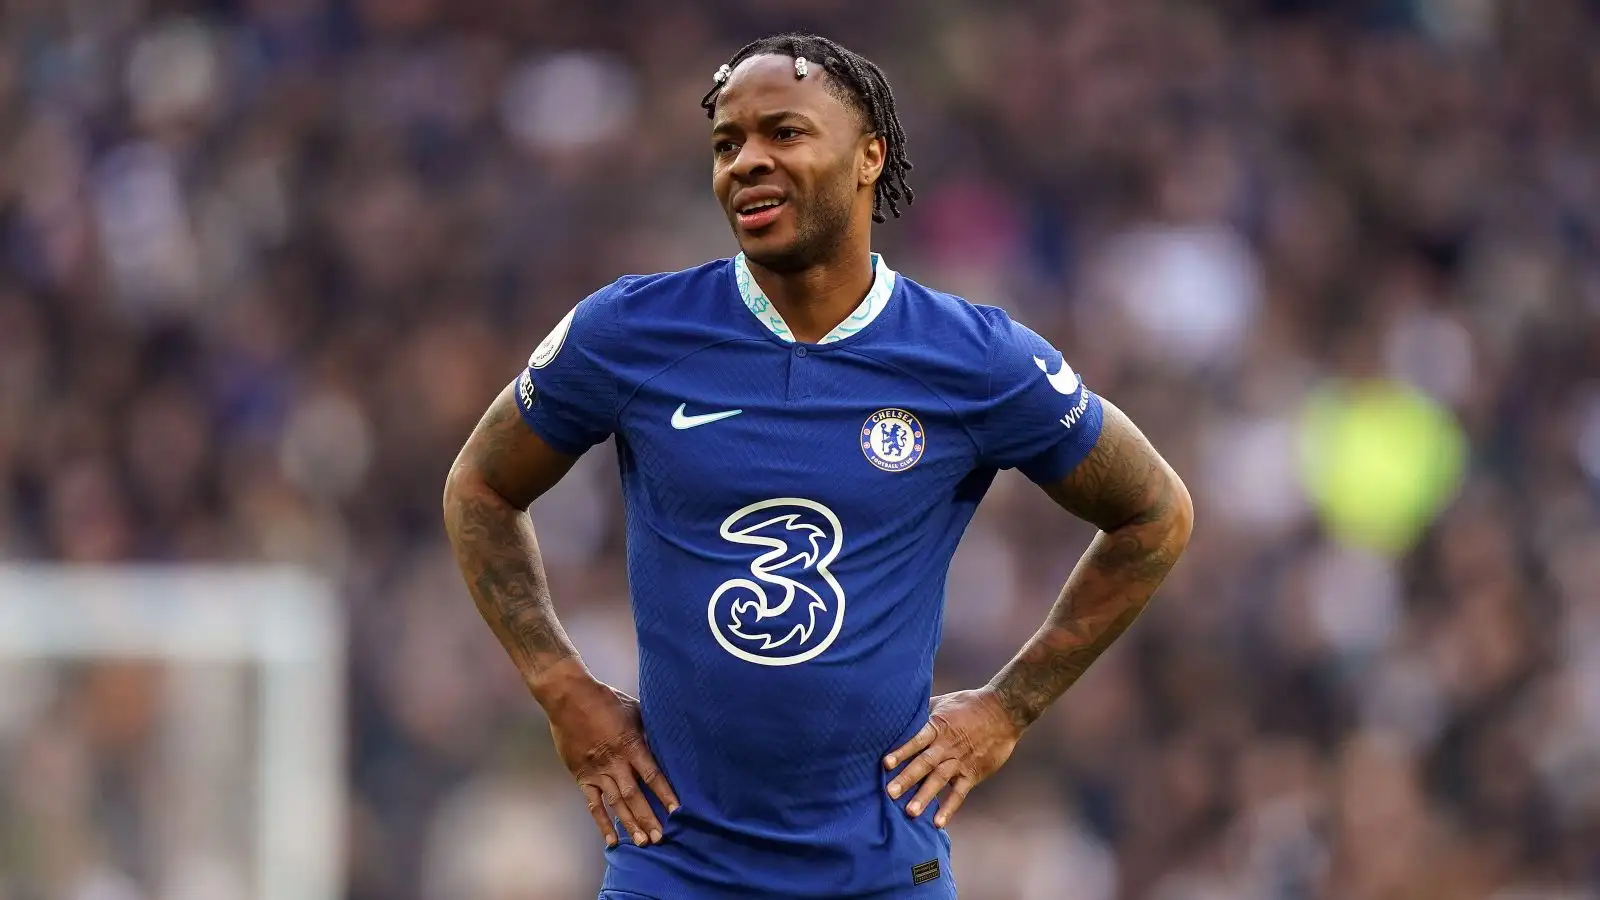 Sterling bounces back from England snub to lead Chelsea's rout of Burnley, Premier League